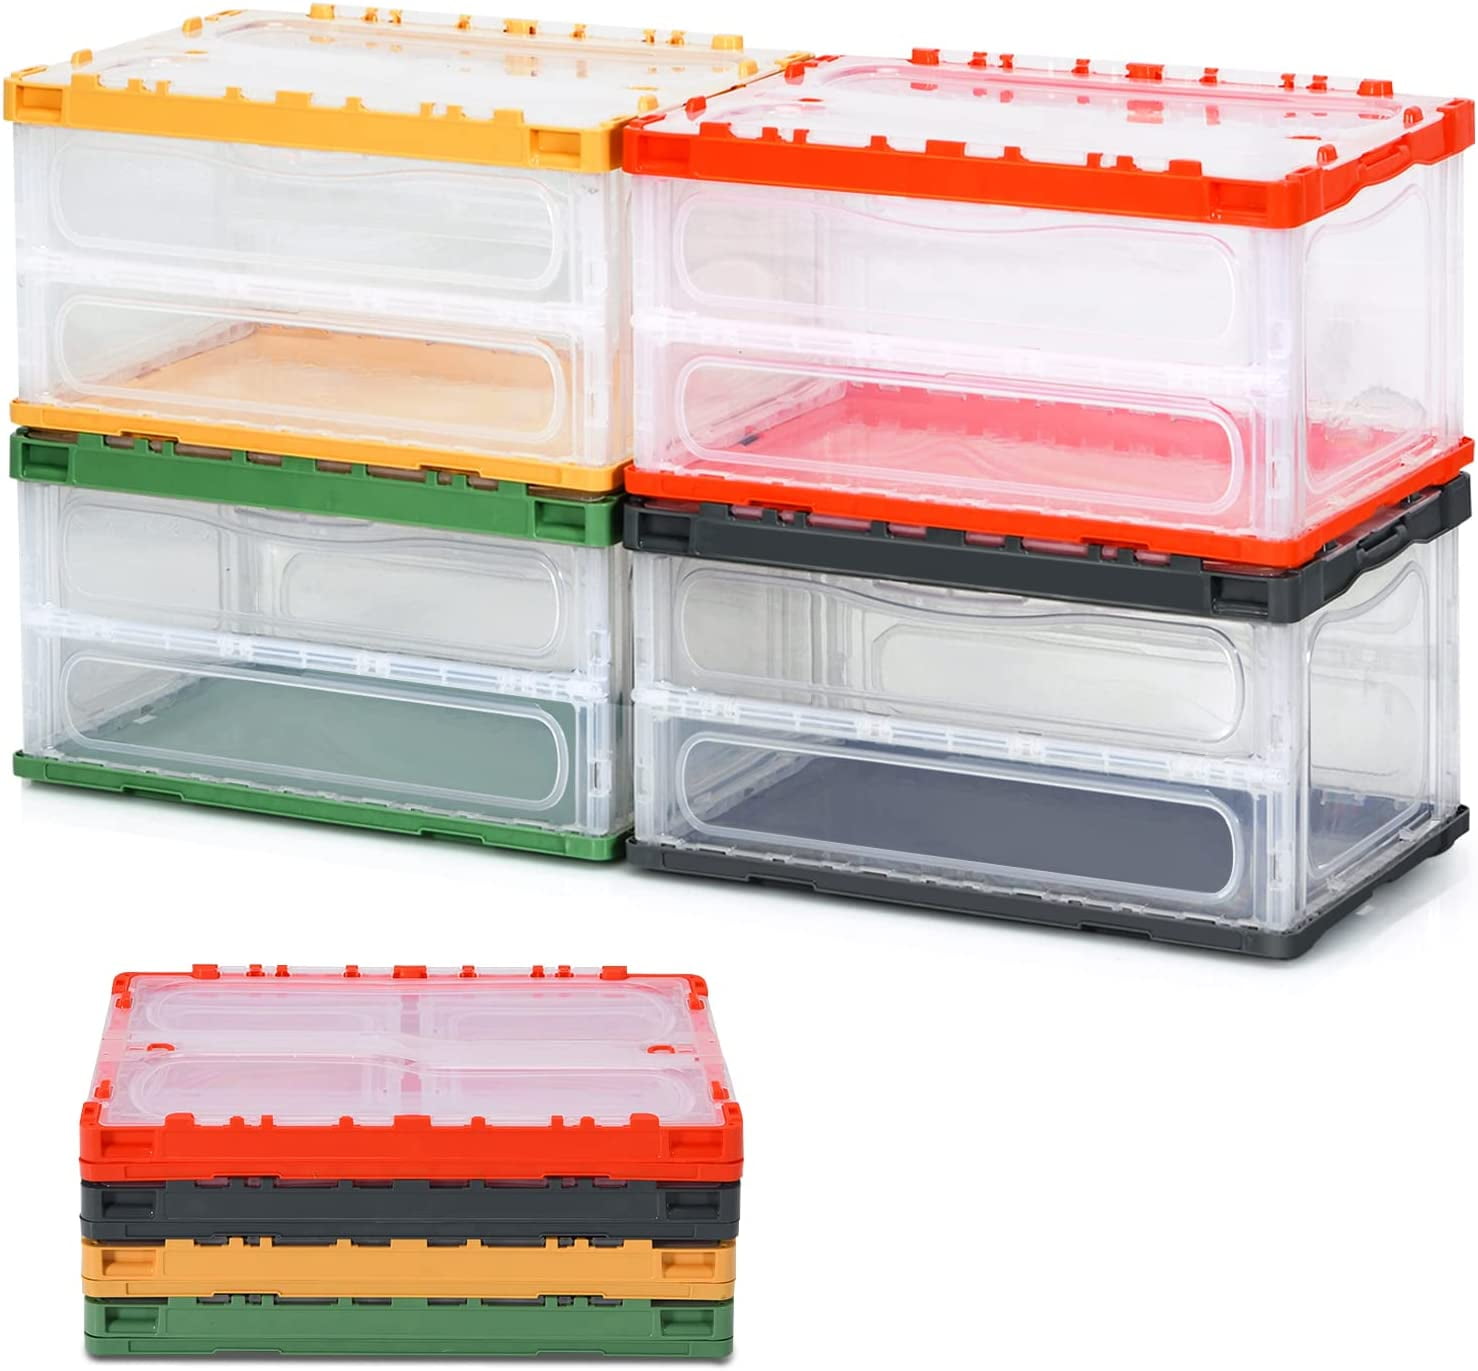 Collapsible Storage Bins Multifunctional Lidded Storage Box Clear  Organization Box for Home Office Cloth Toys Books Snacks Containers  15.35x11.42x9.45inch 